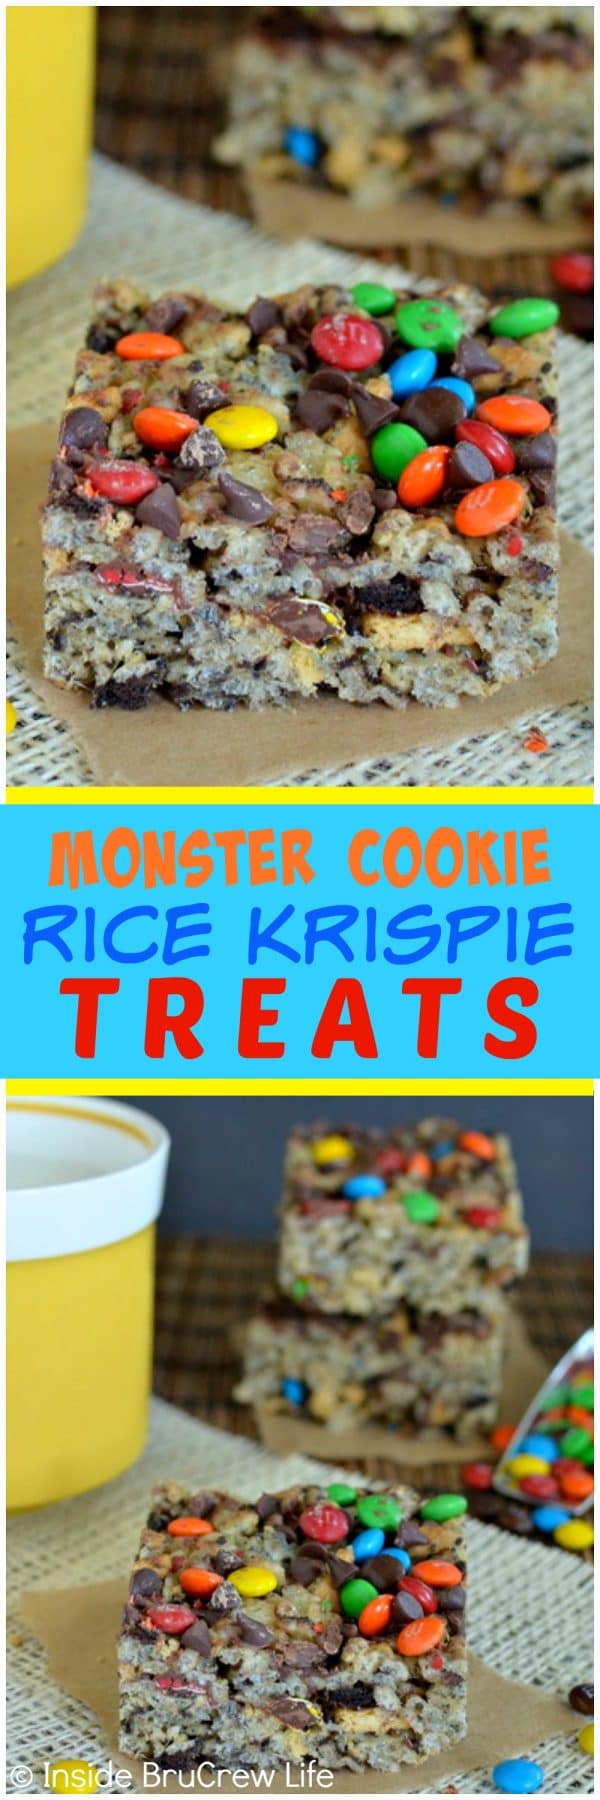 Monster Cookie Rice Krispie Treats - these easy no bake bars are loaded with two kinds of cookies and candy! Great dessert recipe to share with friends!